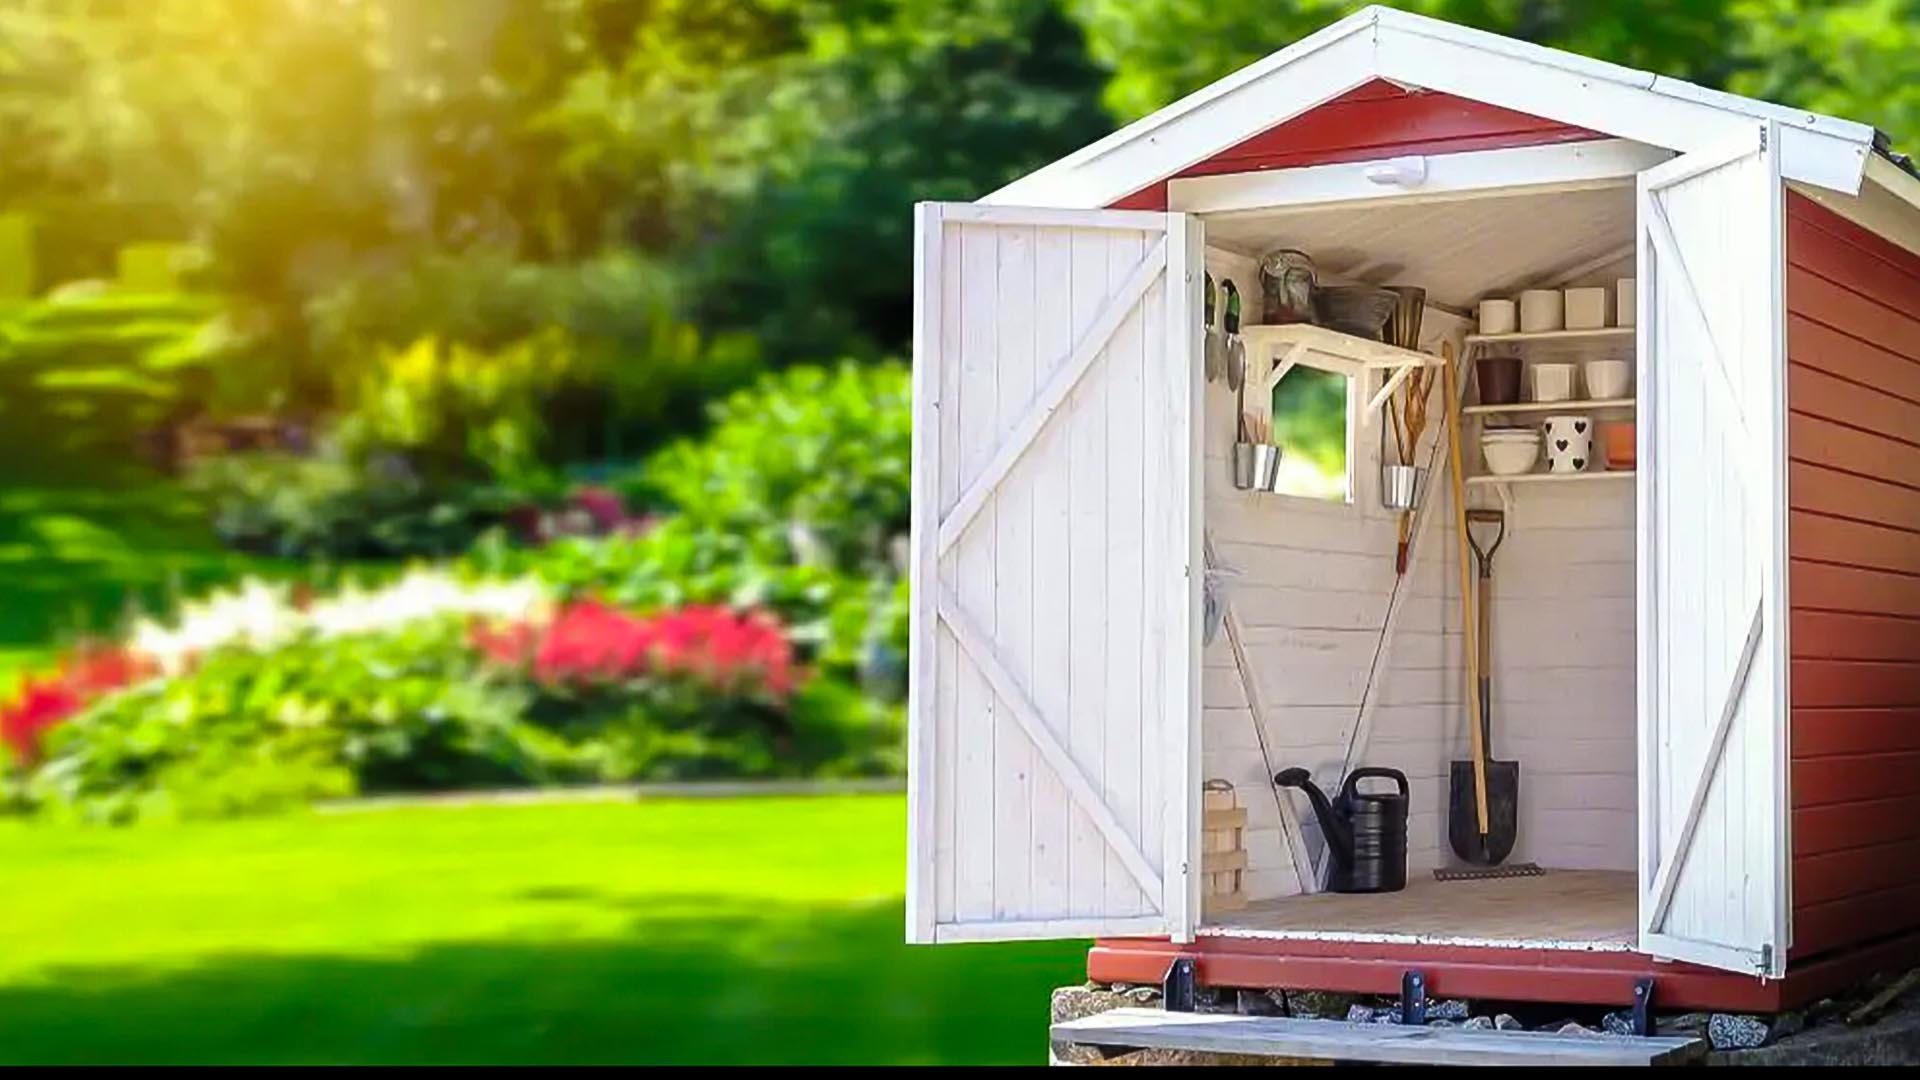 Sun Rise Sheds | Outdoor Storage Sheds: Ten Tips You Need To Maximize Your Organization